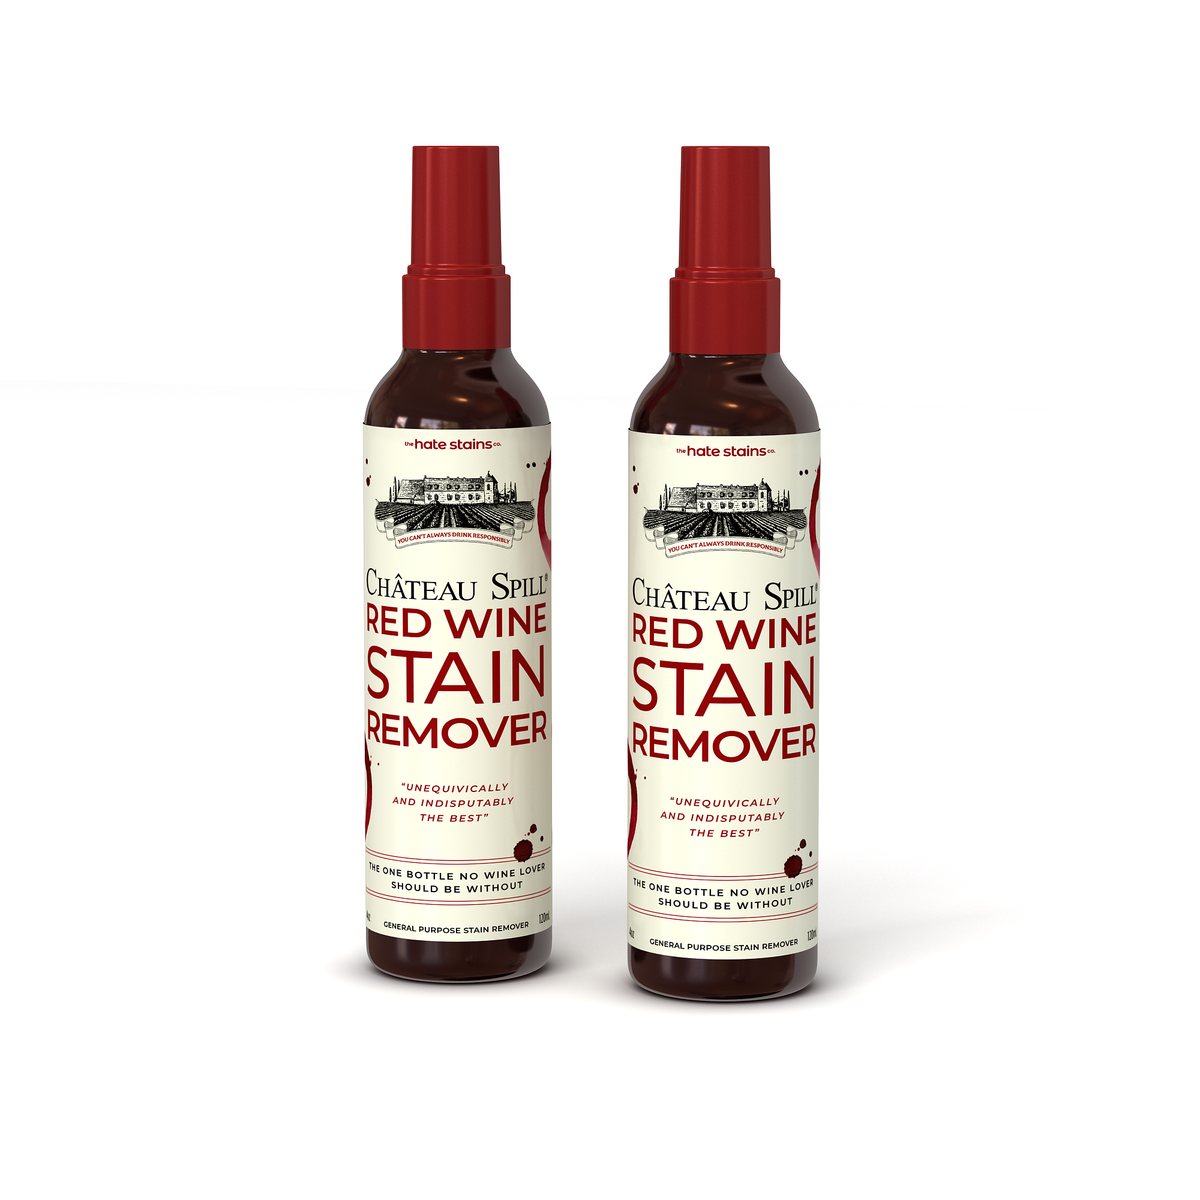 Chateau Spill Red Wine Stain Remover 4oz Bottle: 2 Pack